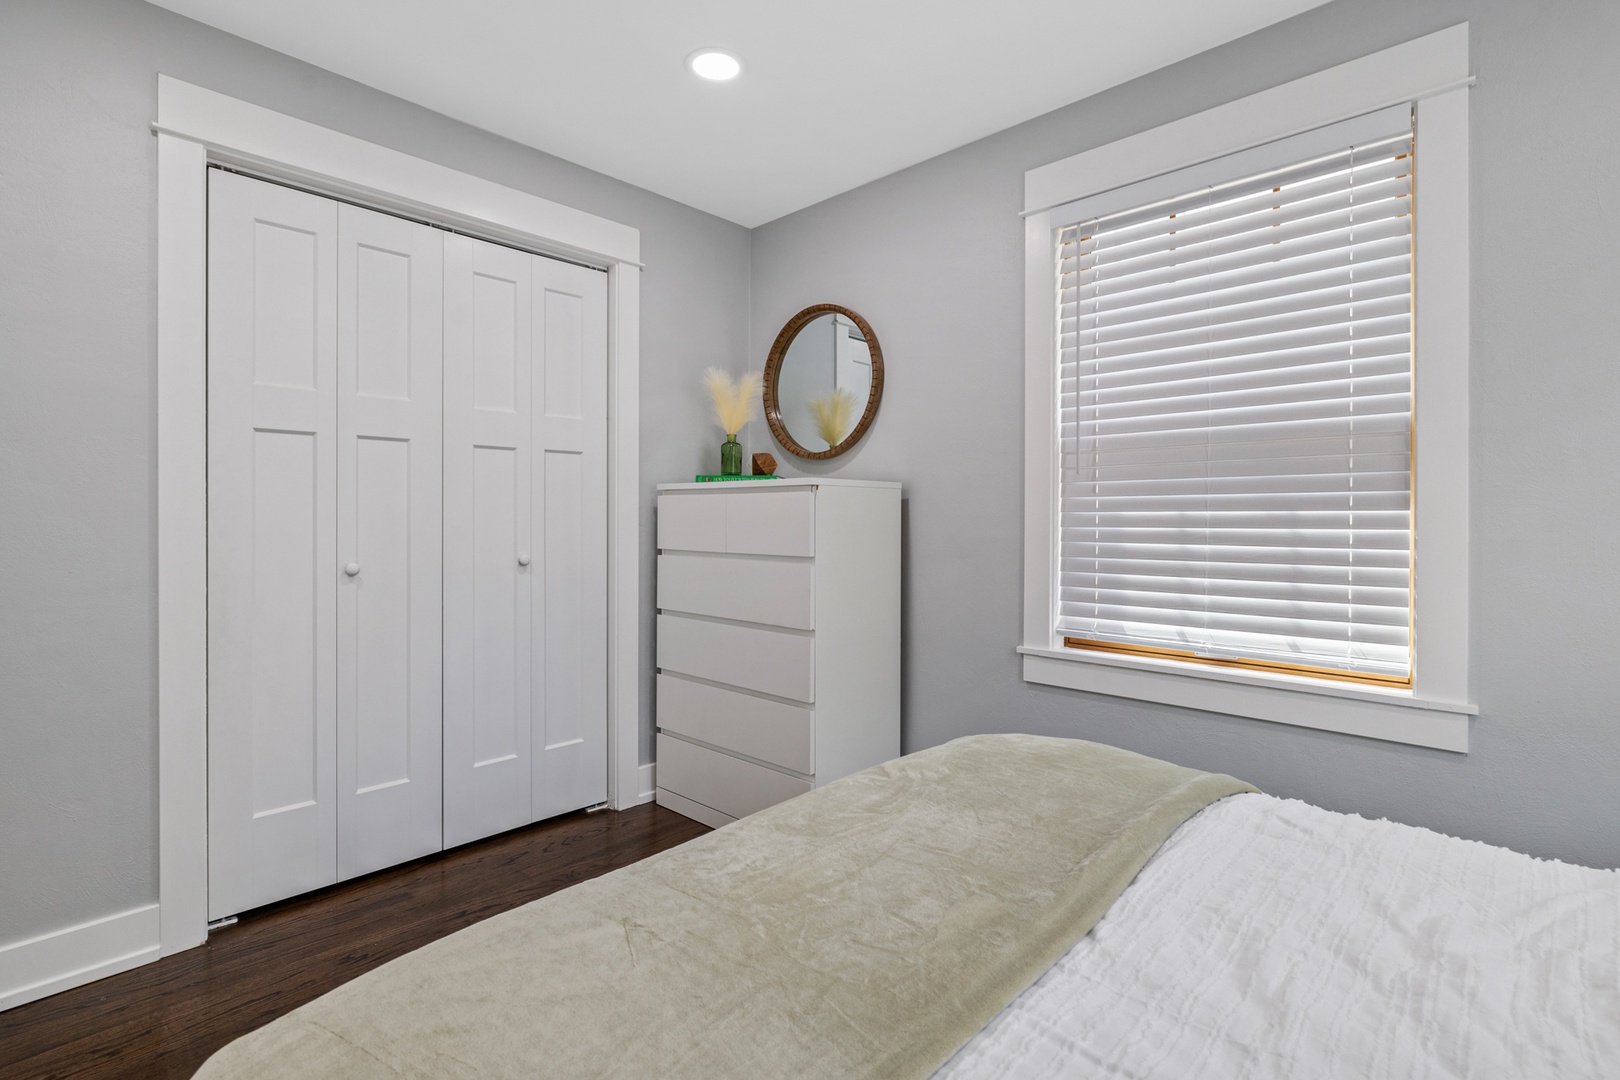 All bedrooms have great storage options.